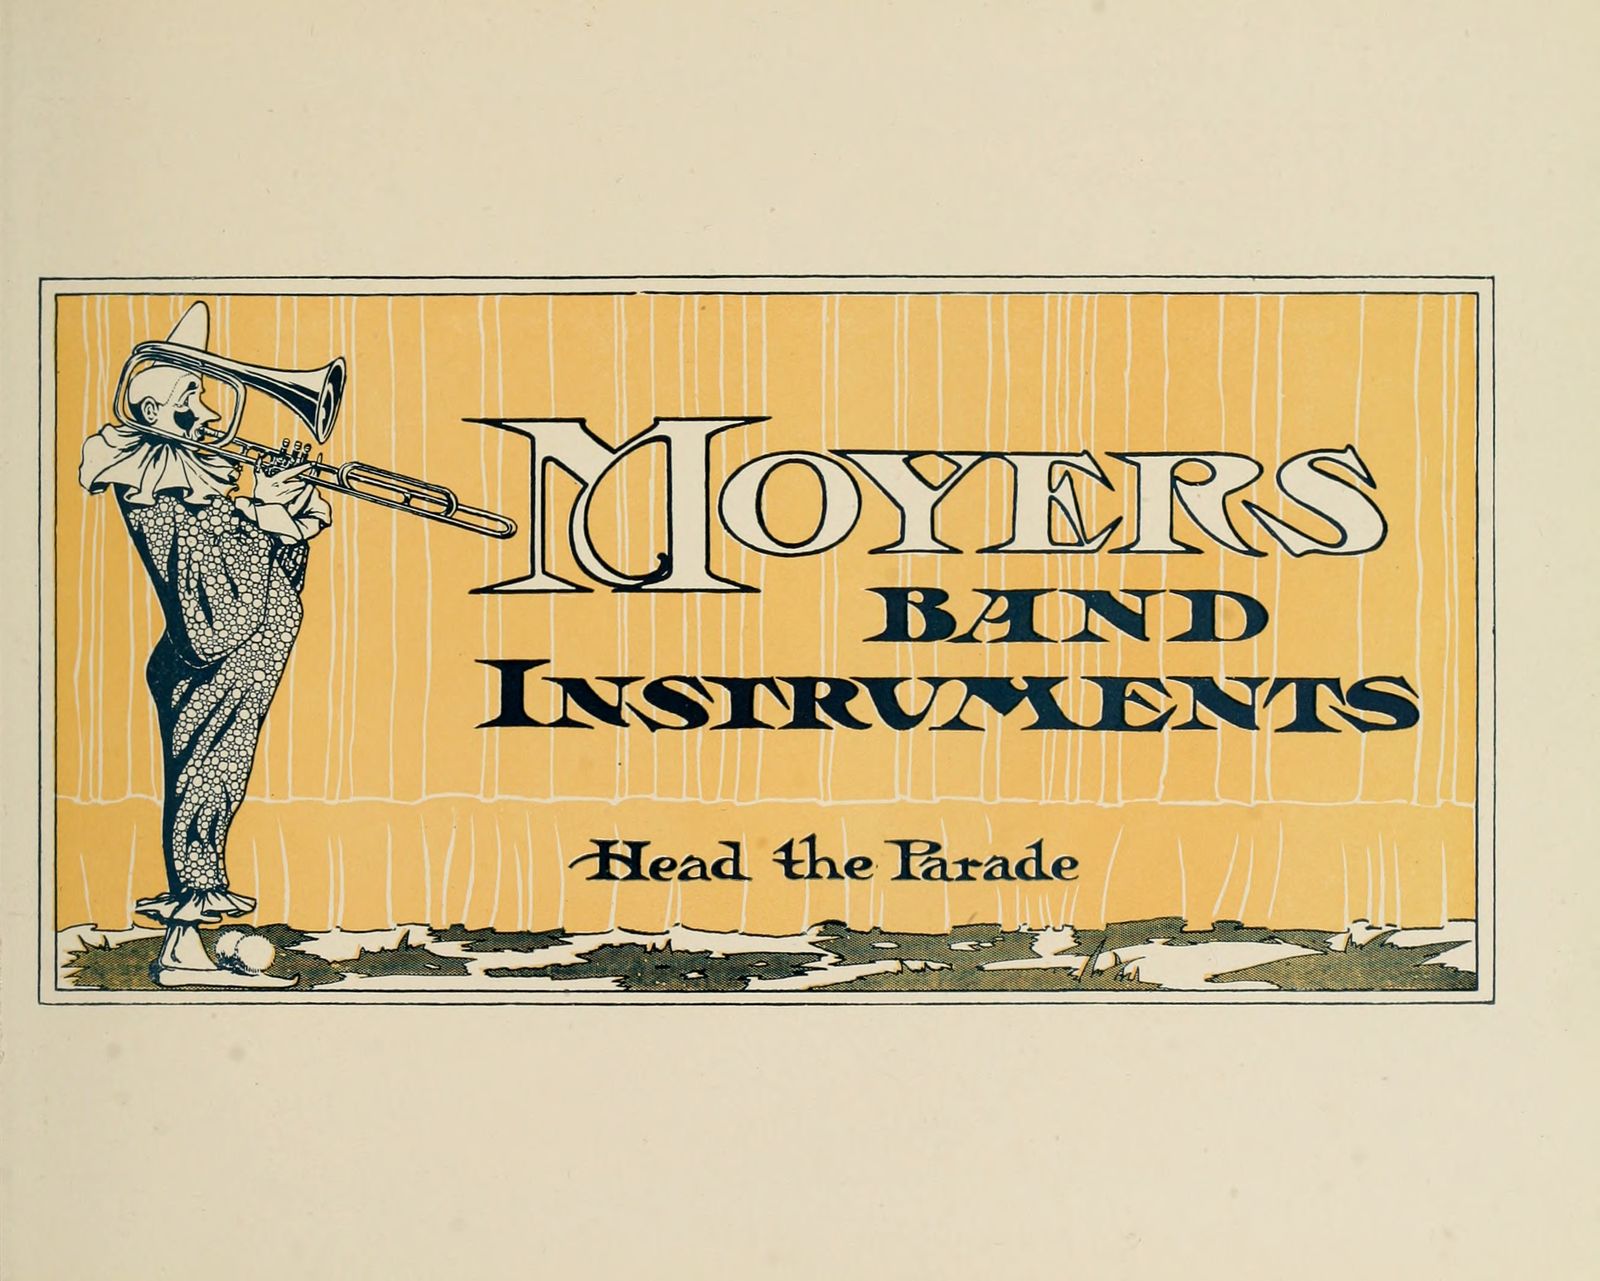 Advertisements with lettering and an illustration of a clown playing a trombone.